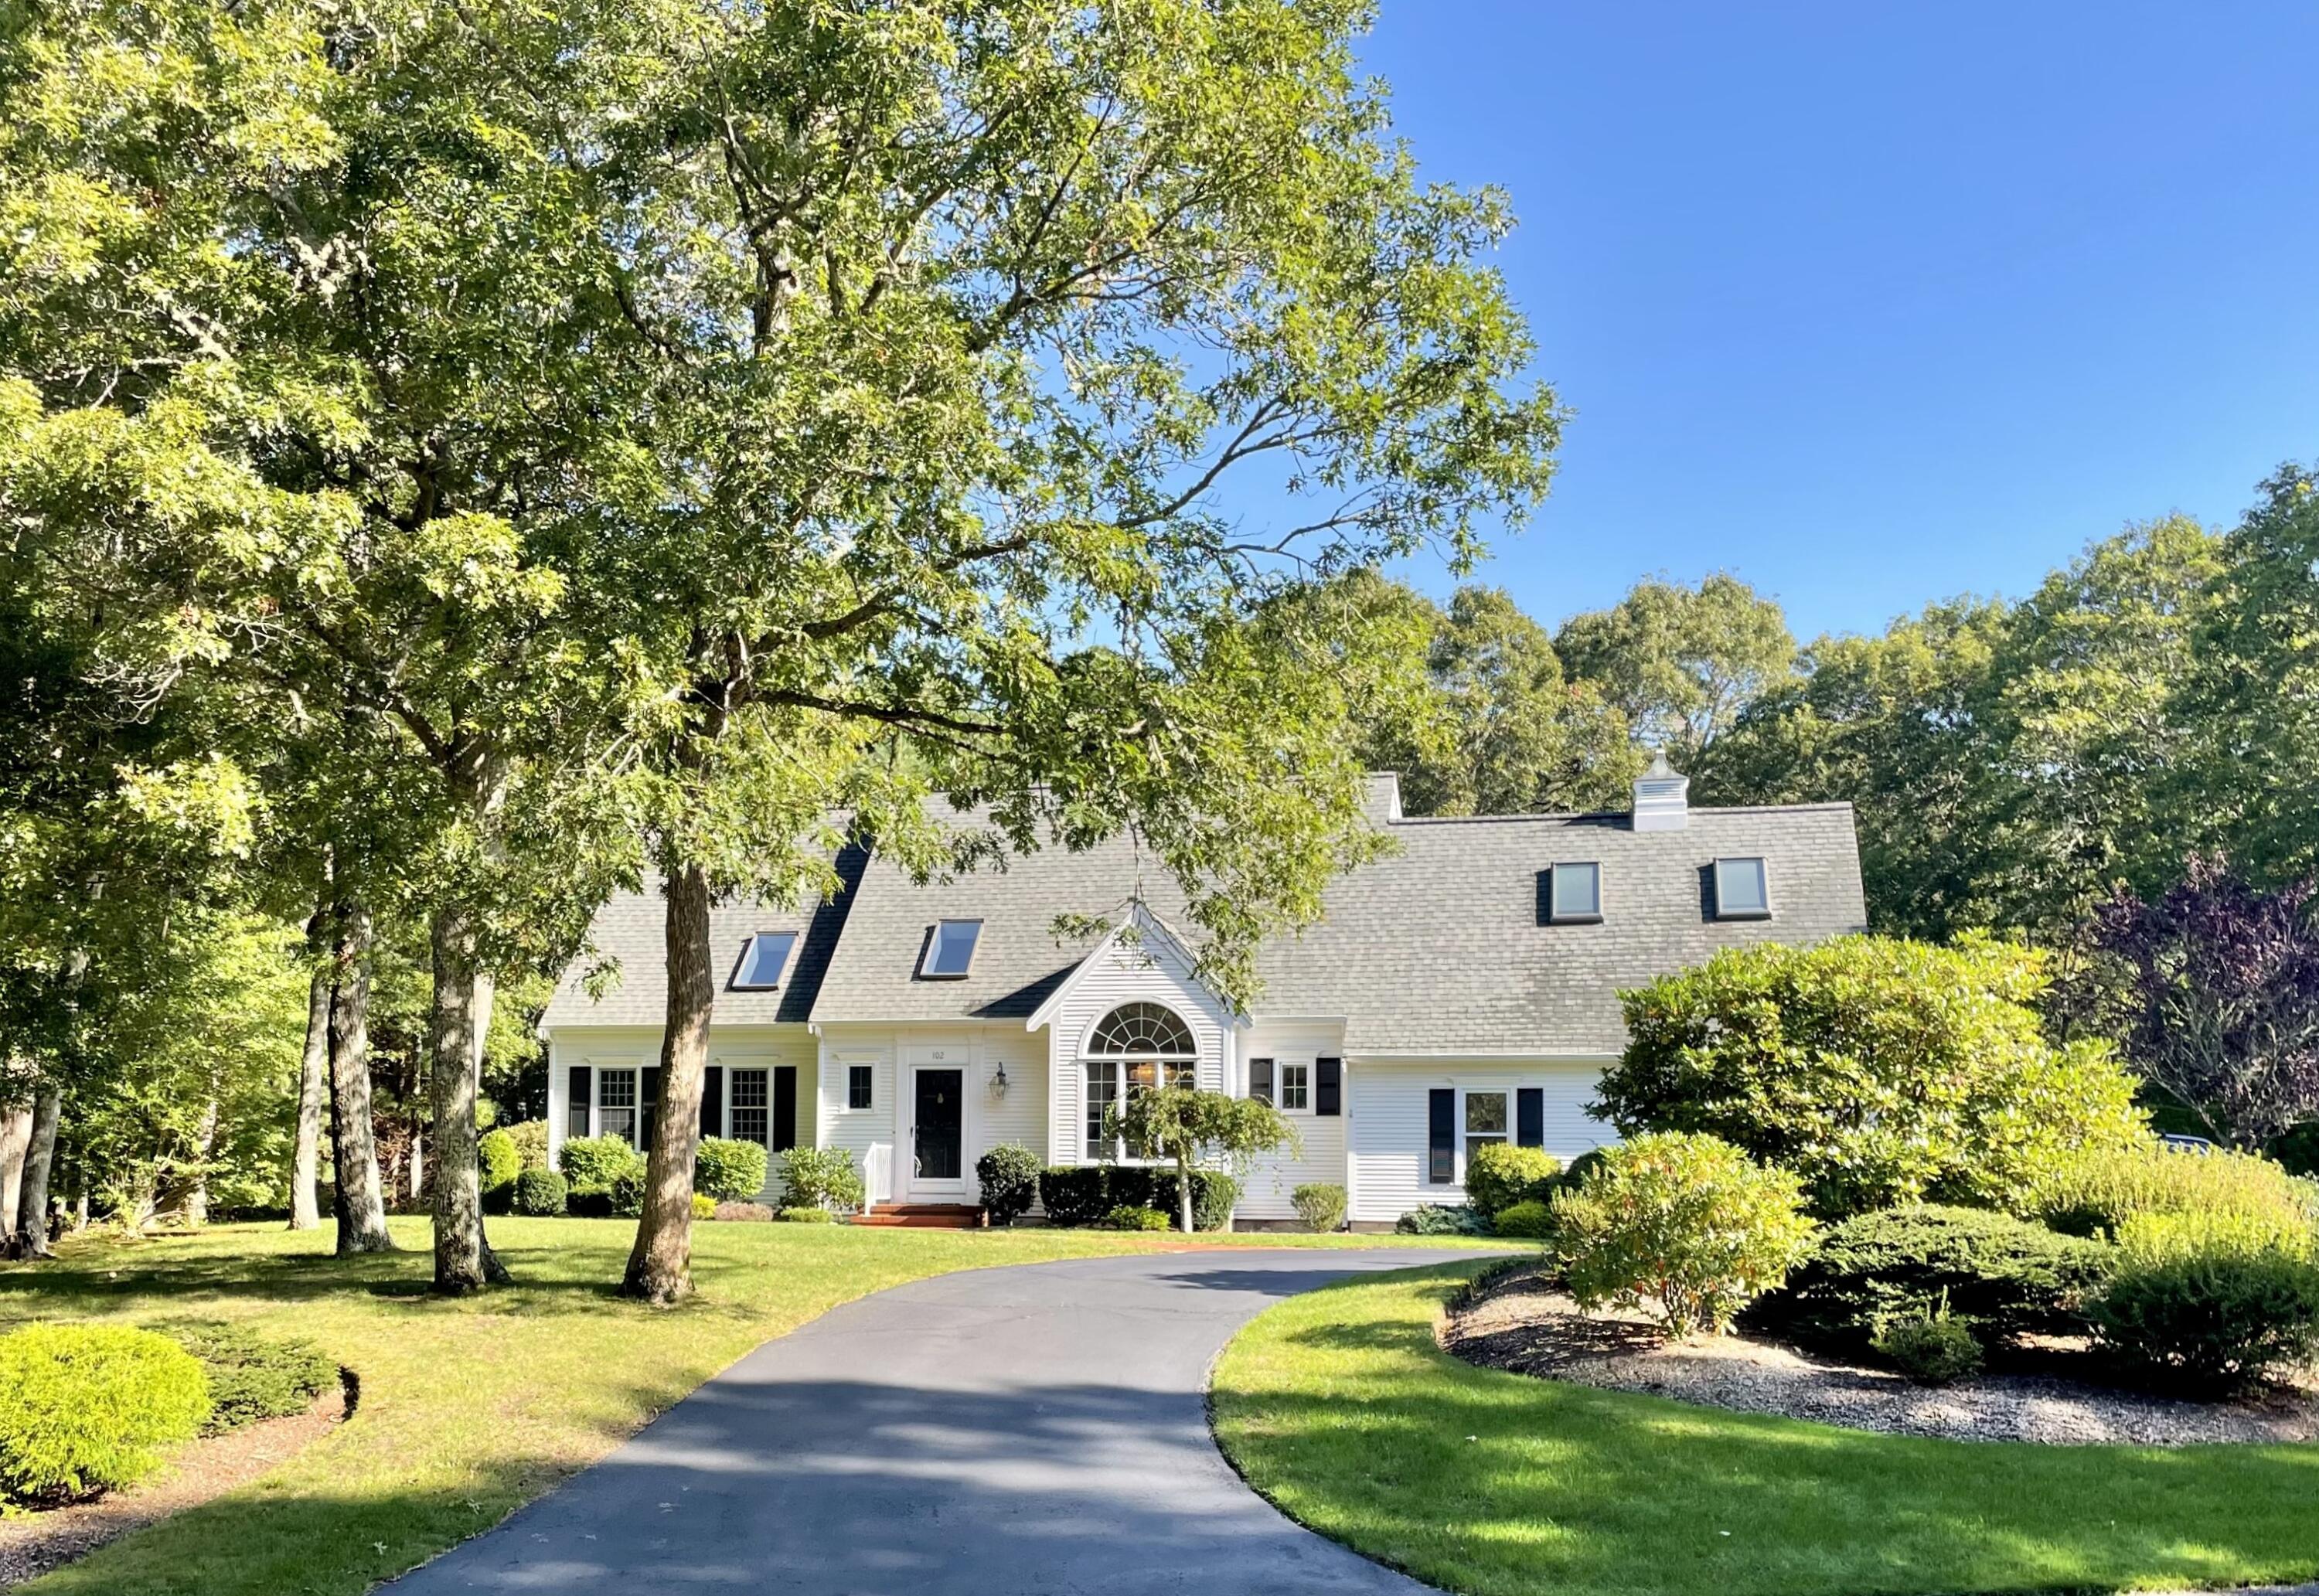 102 Waterford Drive, Cotuit, Massachusetts 02635, 3 Bedrooms Bedrooms, 7 Rooms Rooms,2 BathroomsBathrooms,Residential,For Sale,102 Waterford Drive,22304371